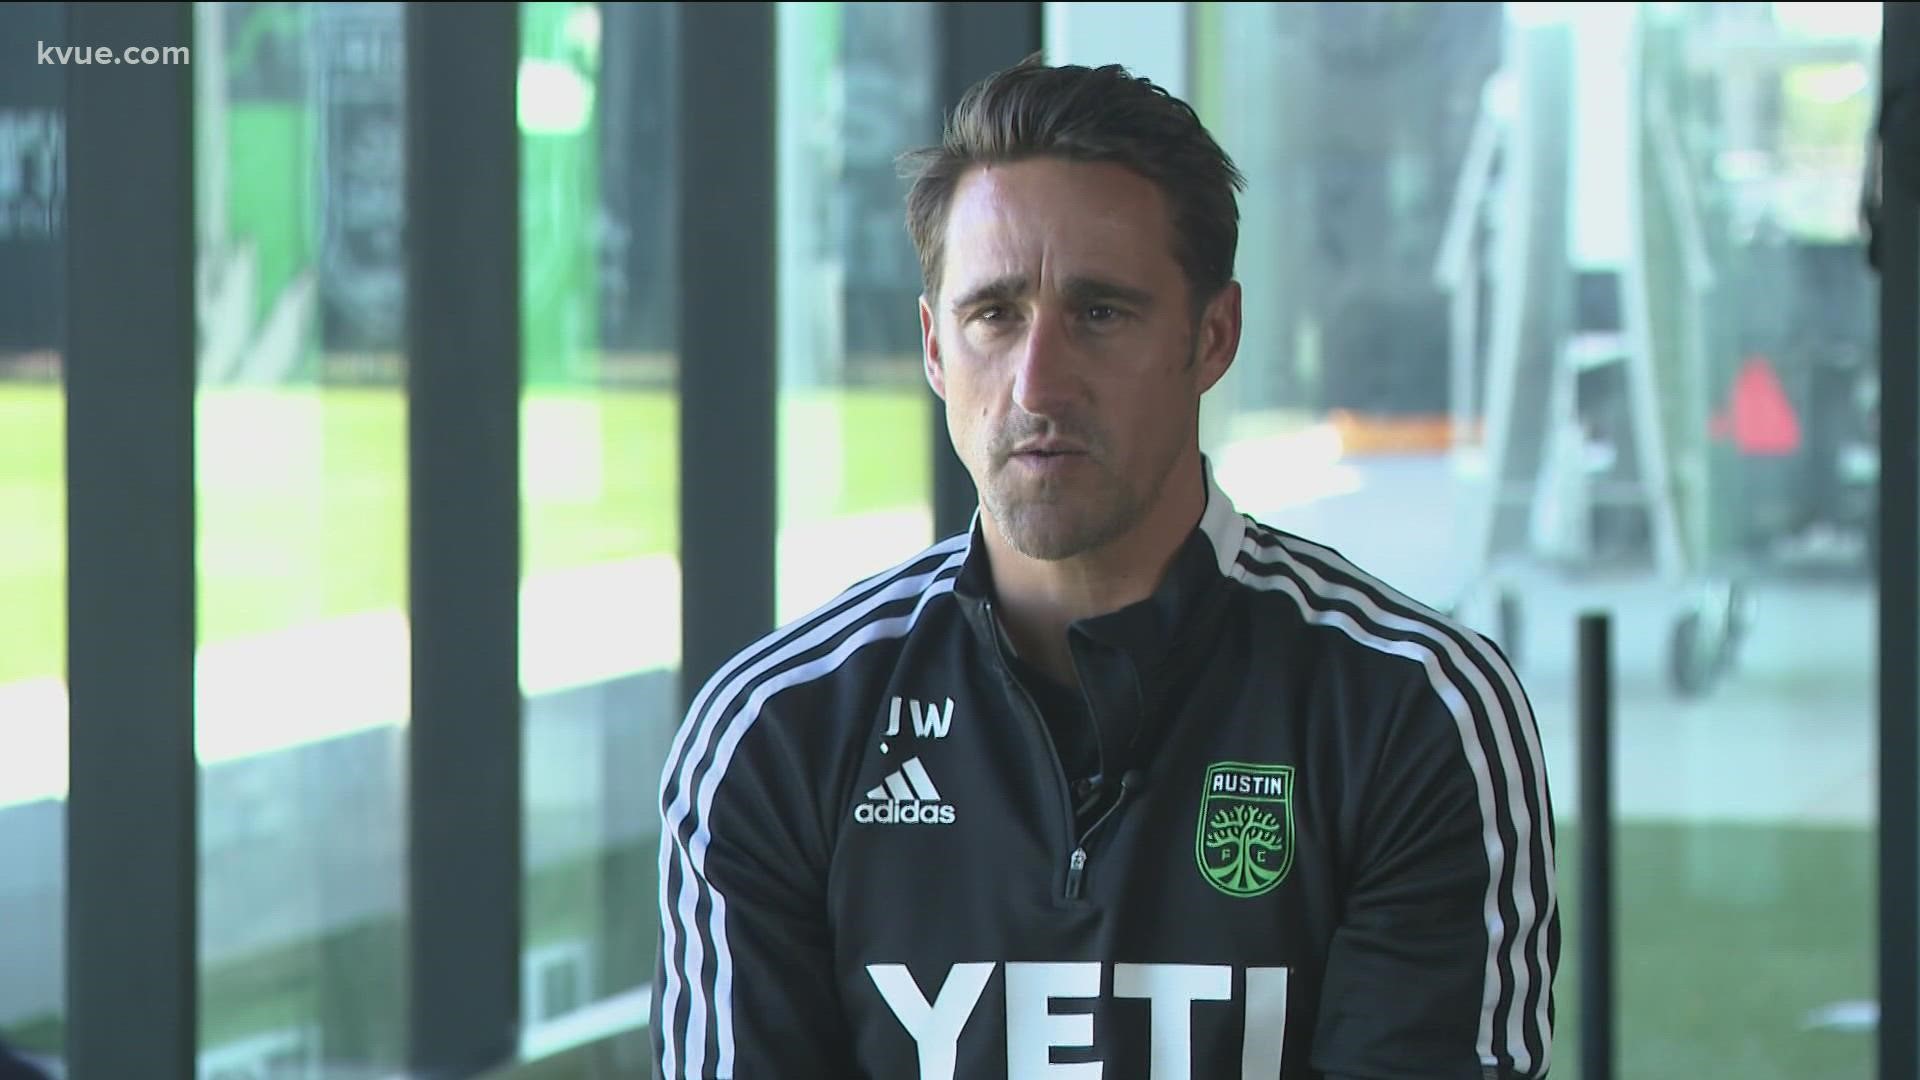 Ahead of Saturday's match against FC Dallas, KVUE's Tyler Feldman got an exclusive one-on-one sit-down with head coach Josh Wolff.